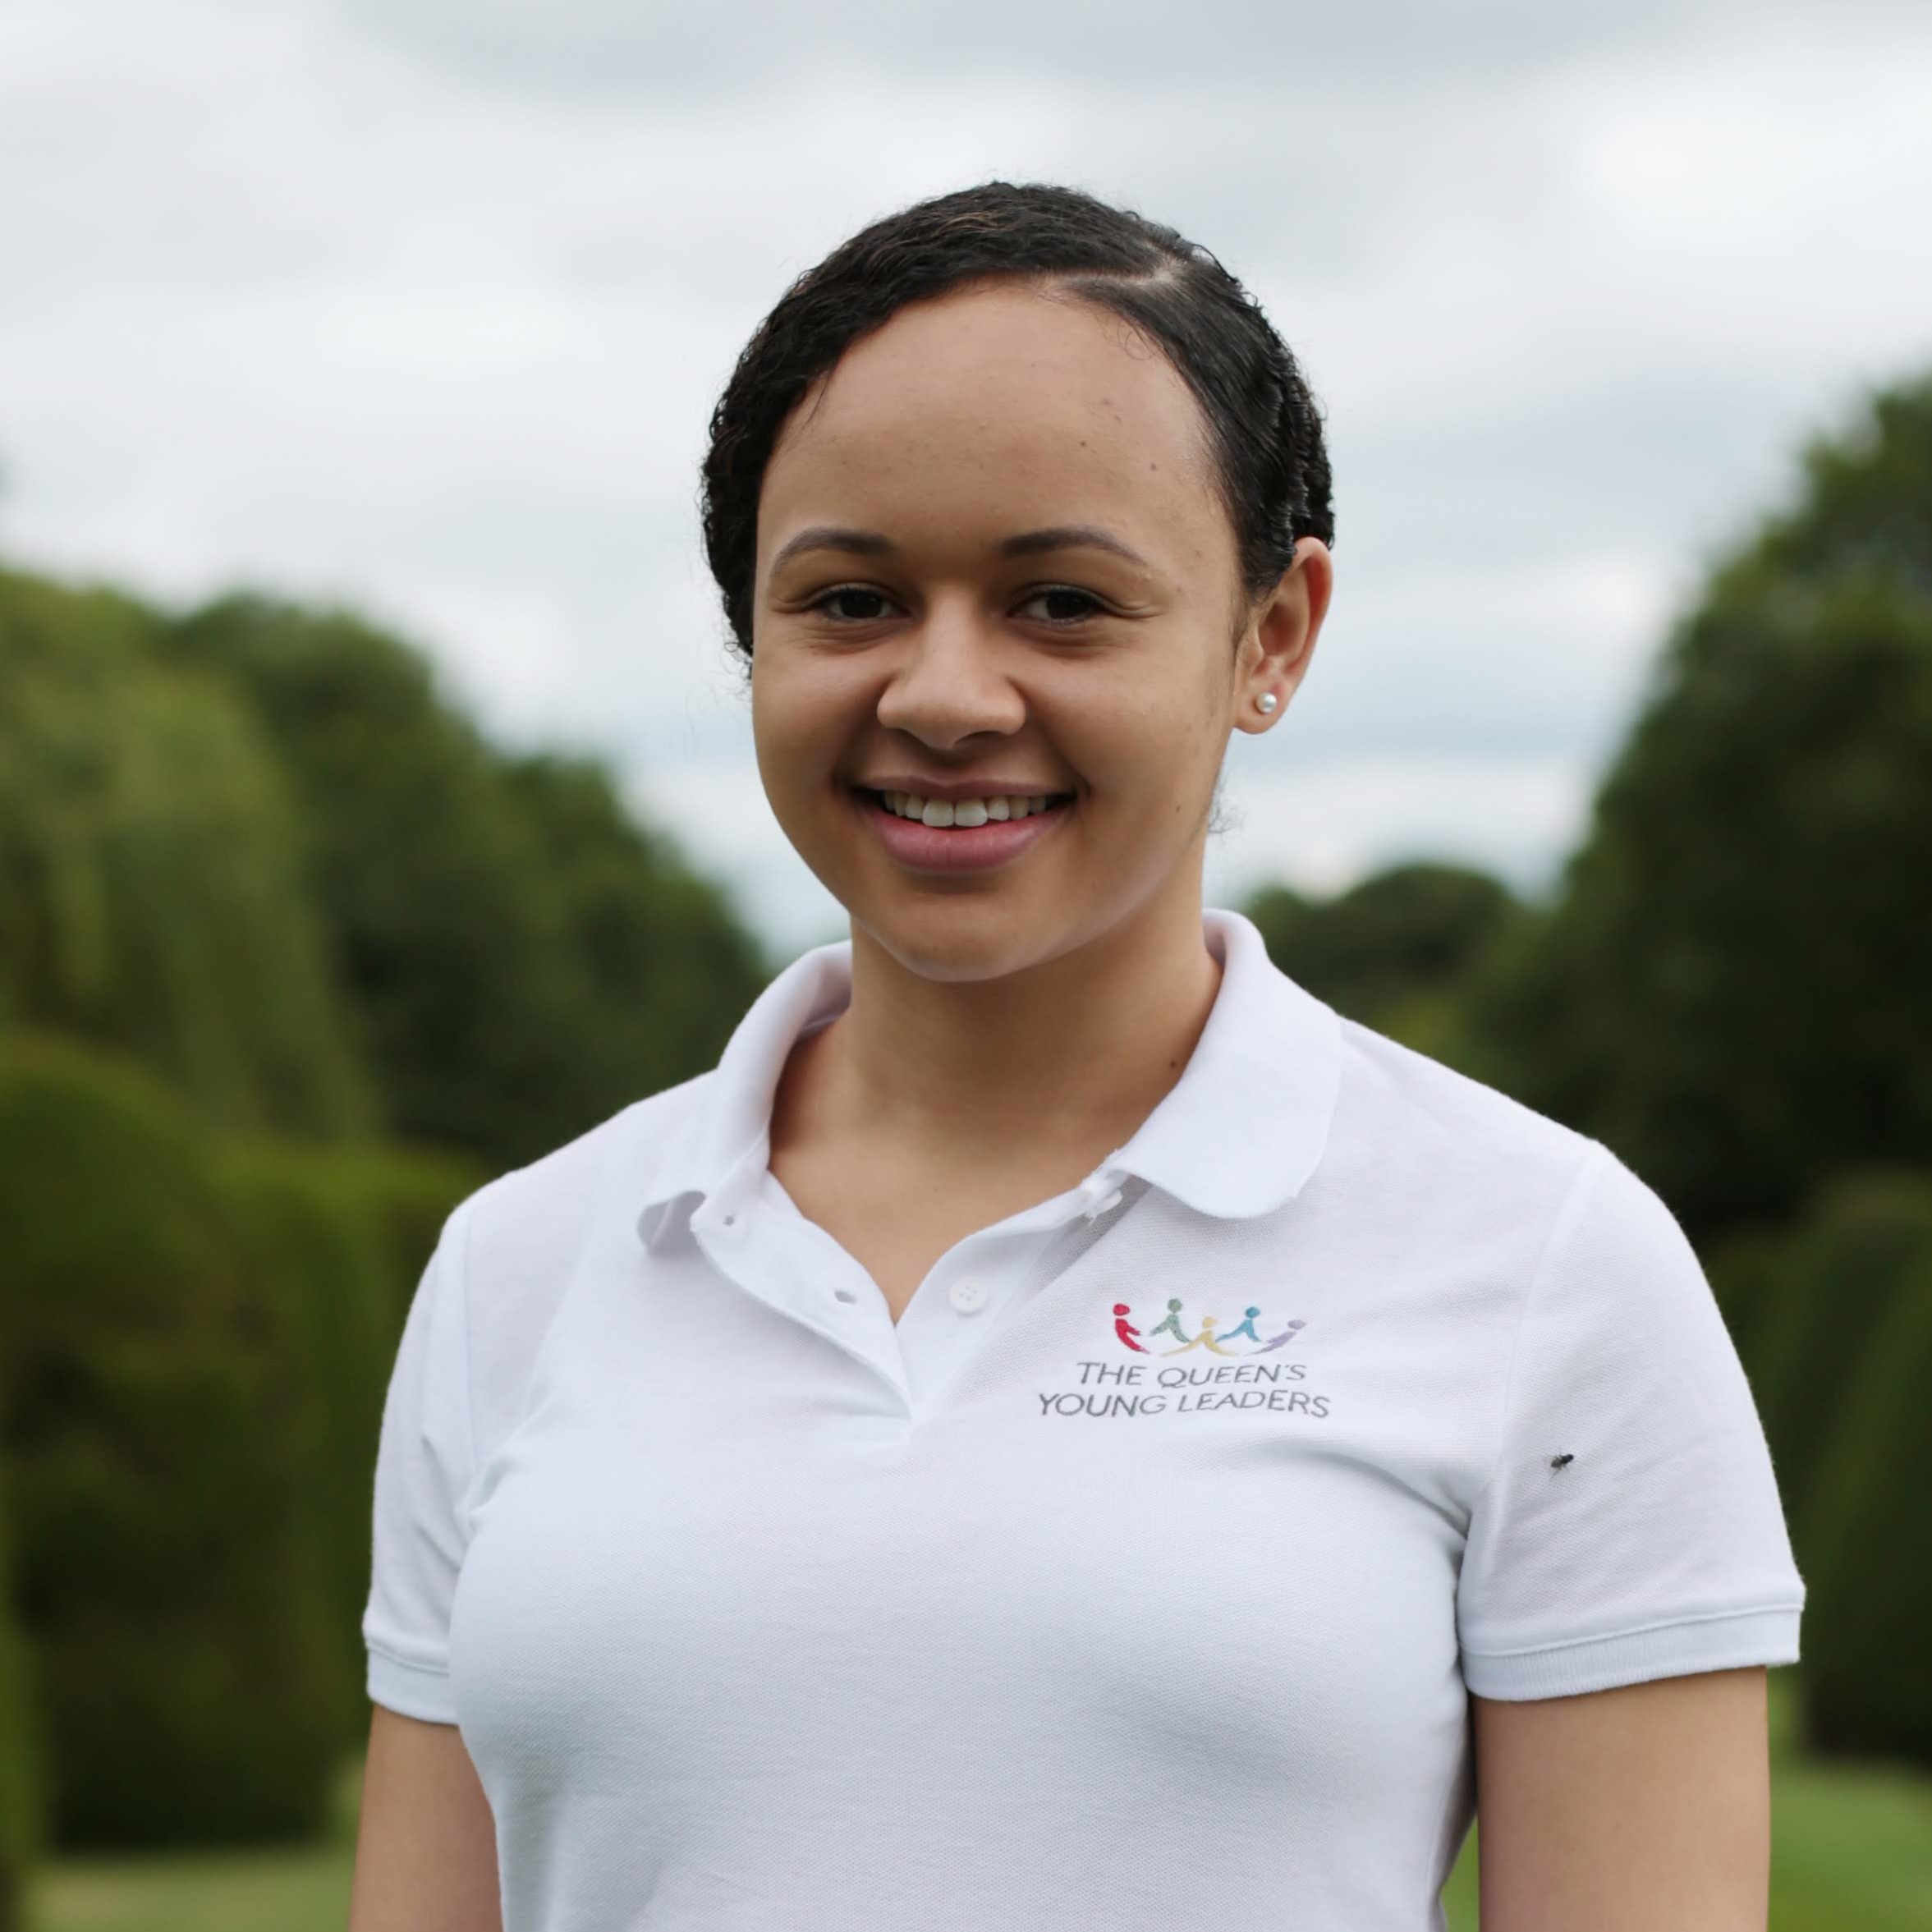 Leanne Armitage 2018 Queen's Young Leader from the United Kingdom